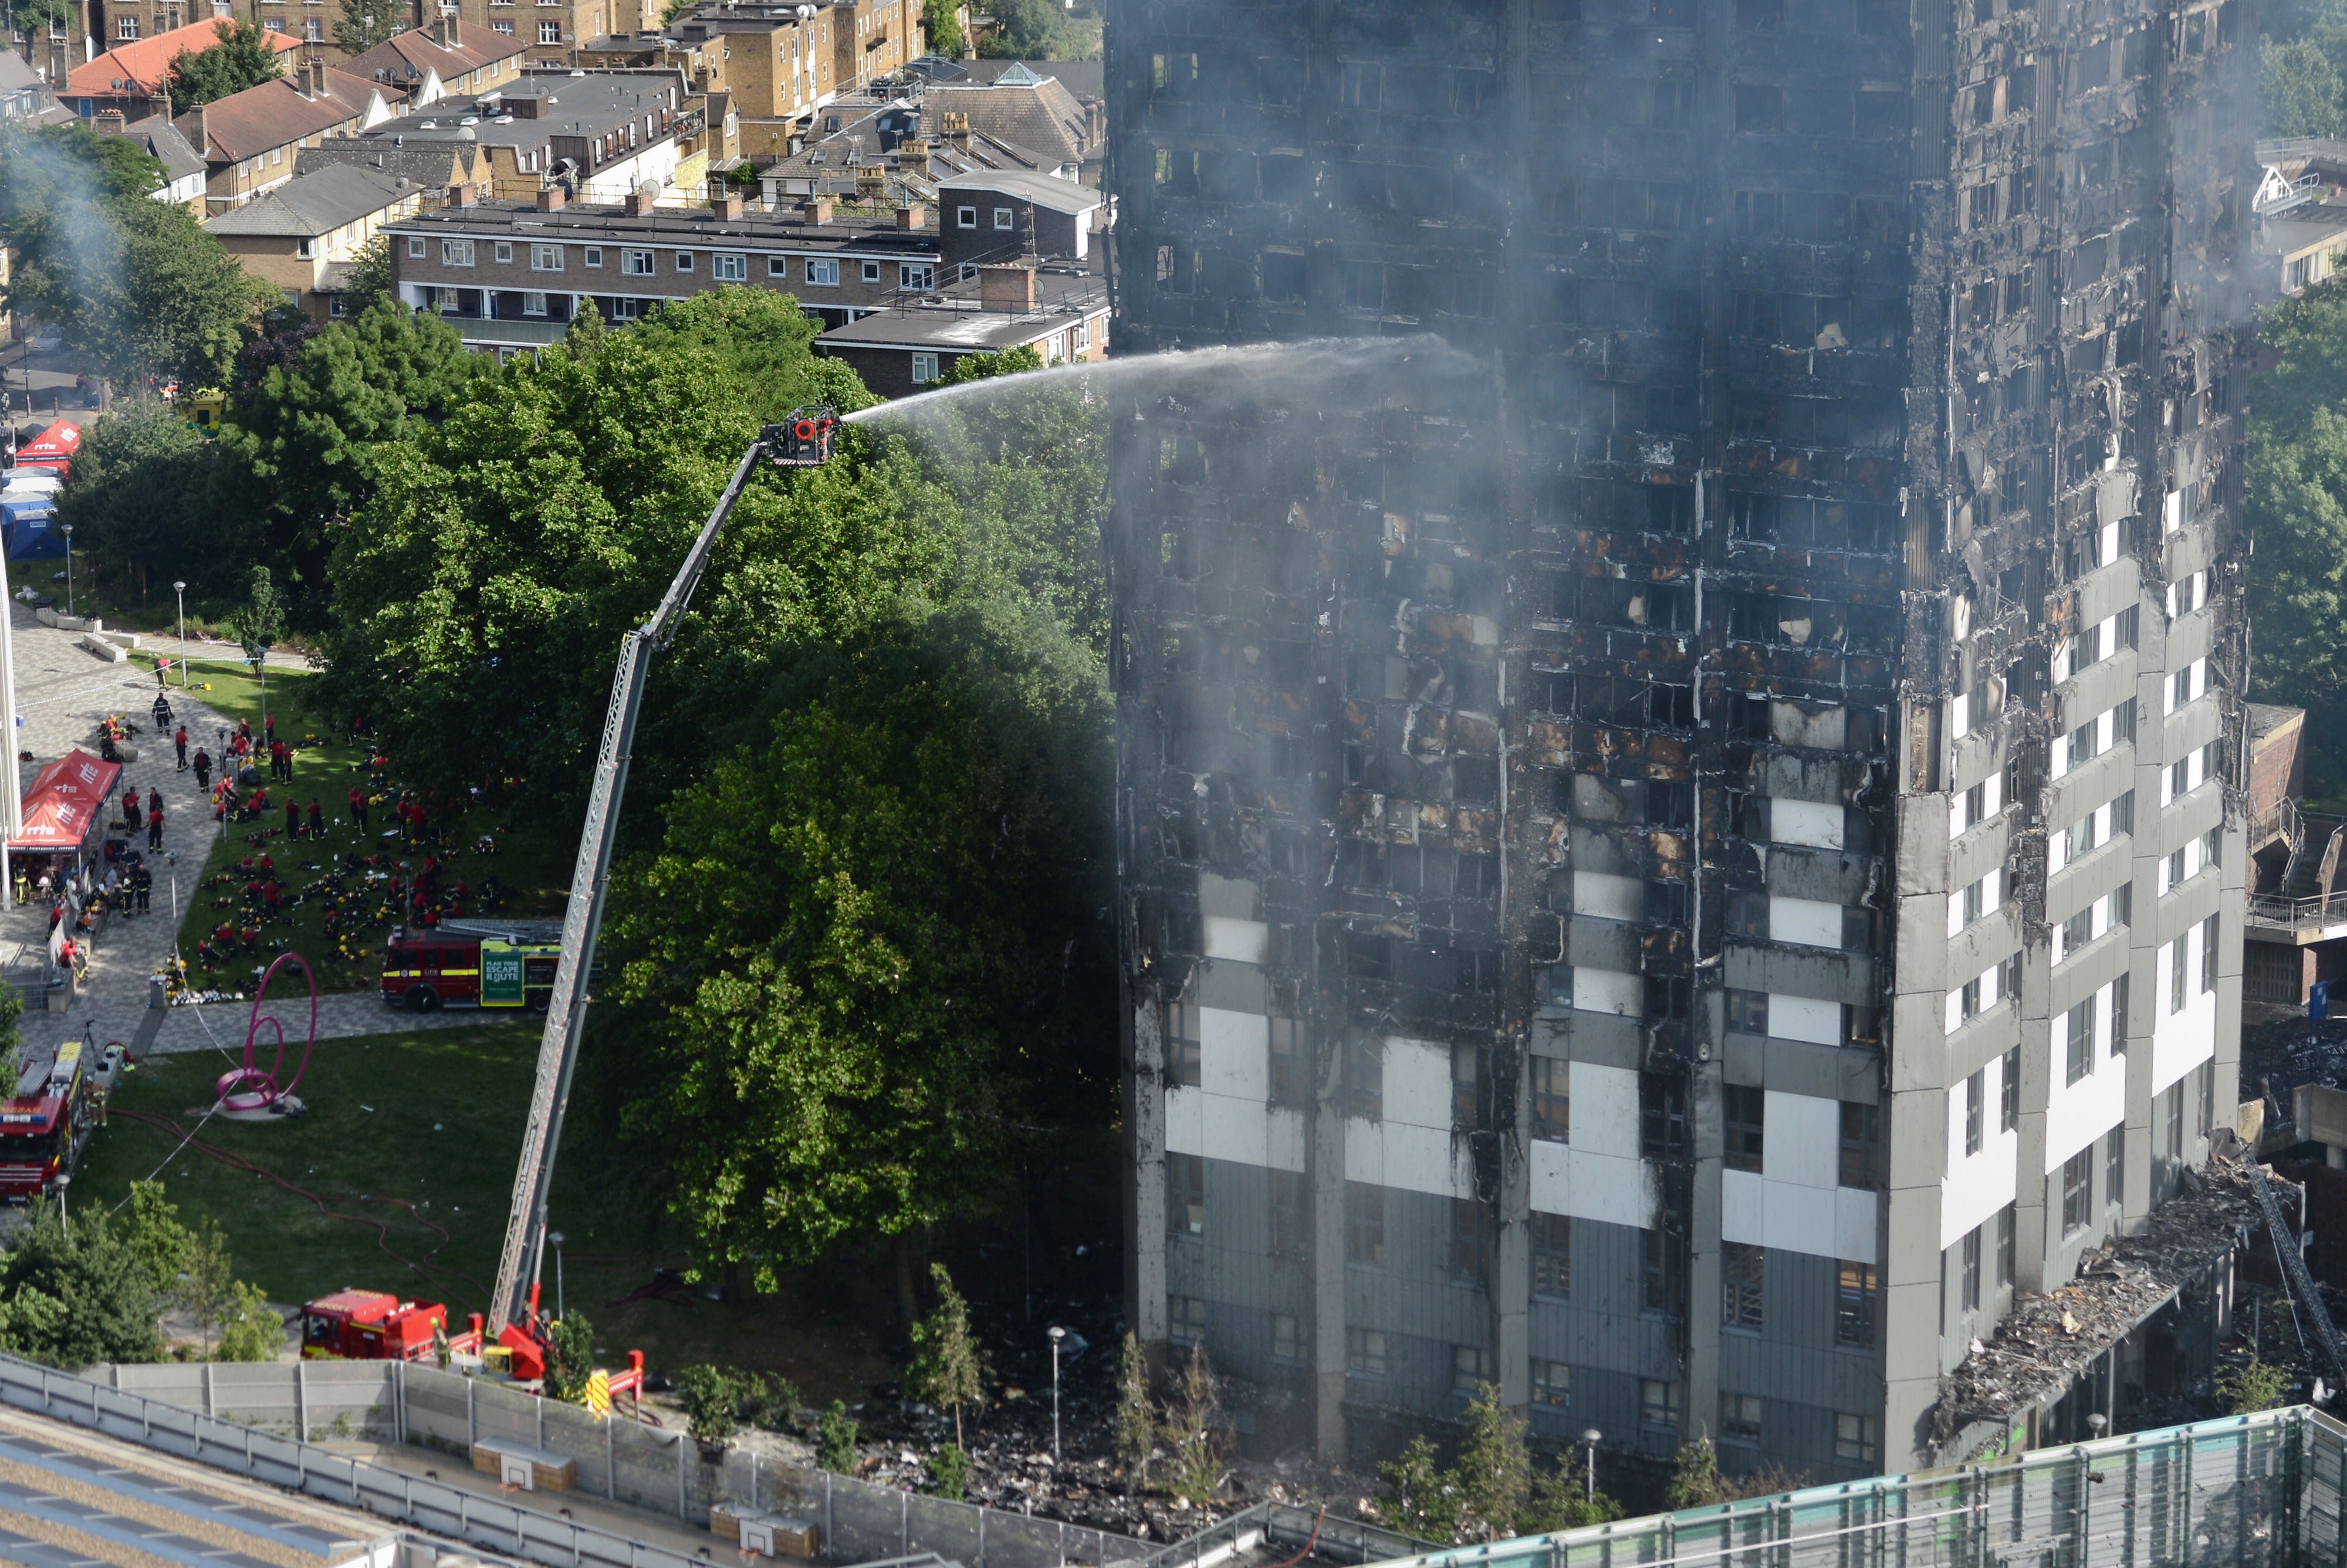 Seventy-two people were killed in the Grenfell Tower fire (Victoria Jones/PA)